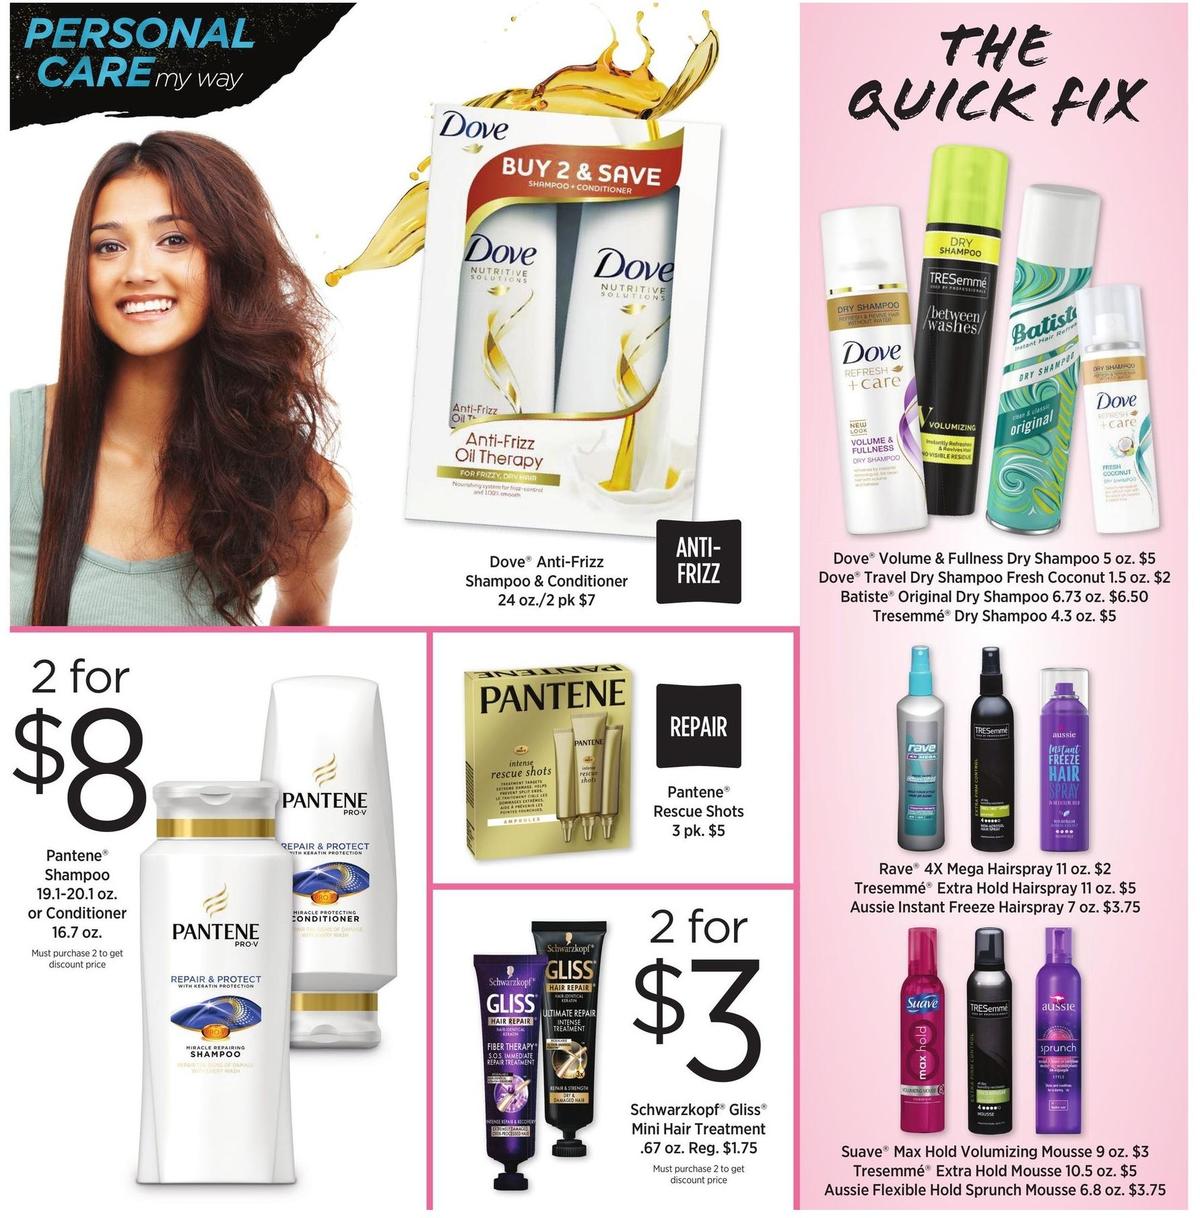 Dollar General Health, Beauty and More - For Less! Weekly Ad from July 28